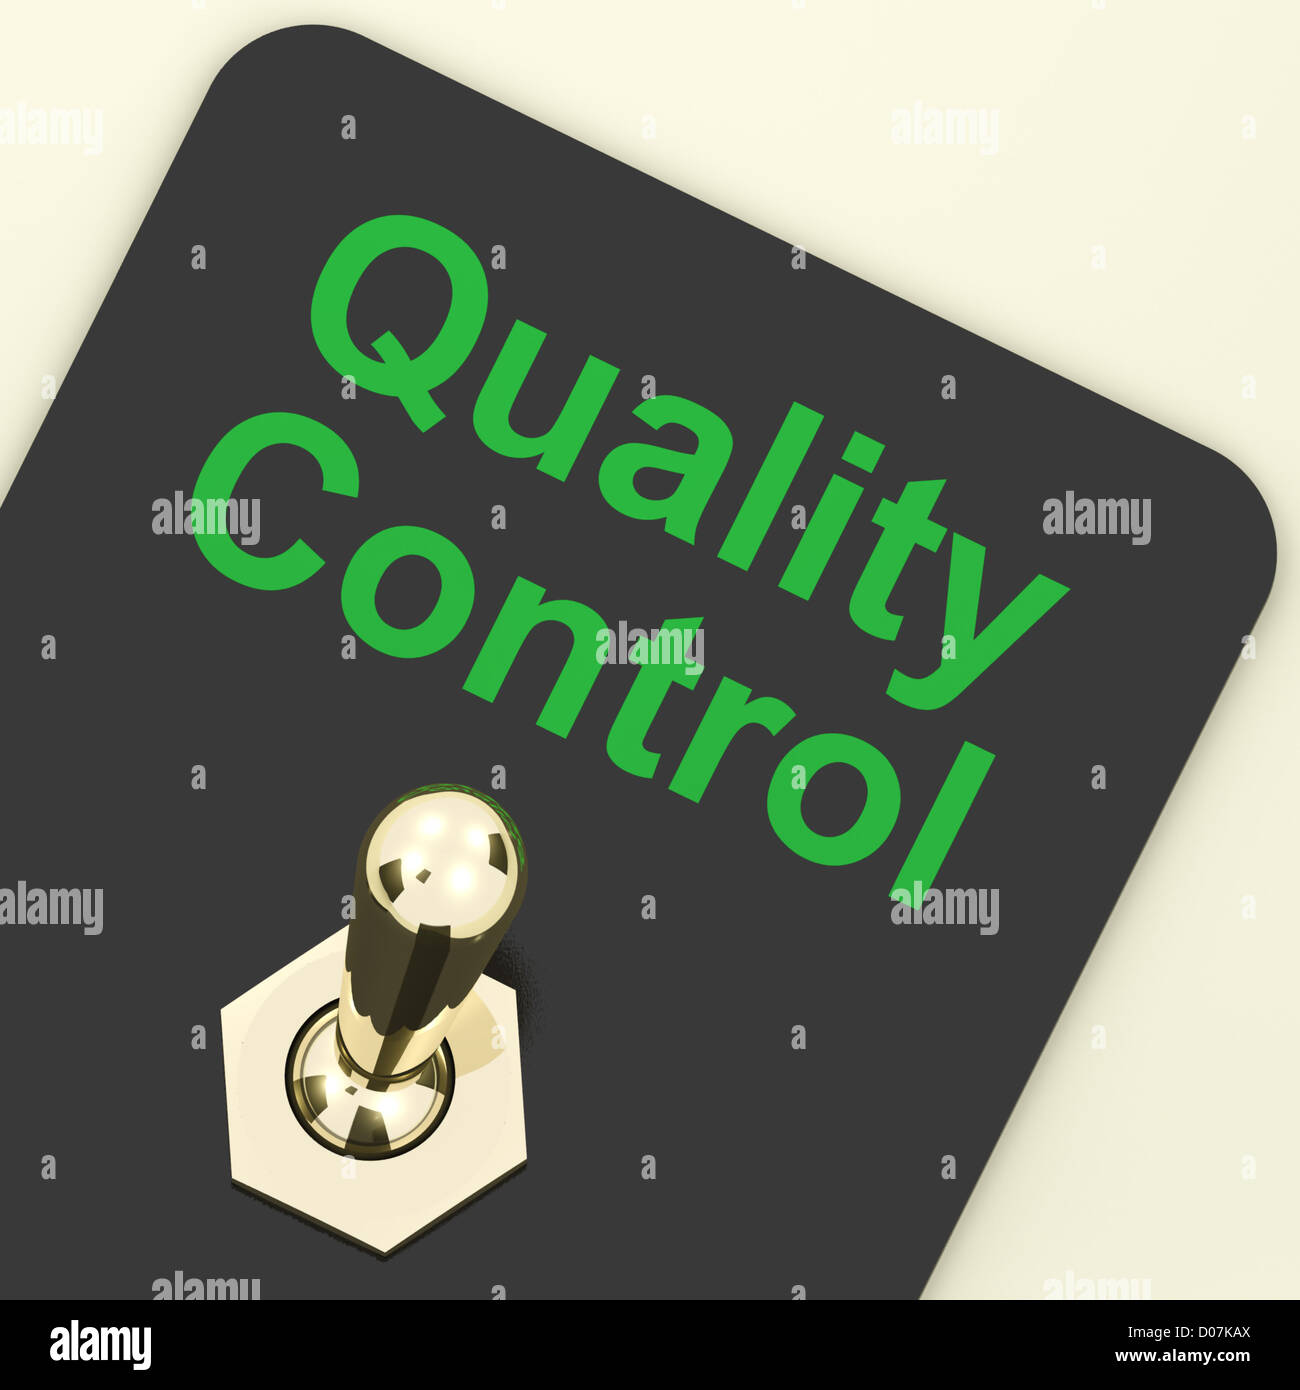 Quality Control Switch On Showing Satisfaction And Perfection Stock Photo